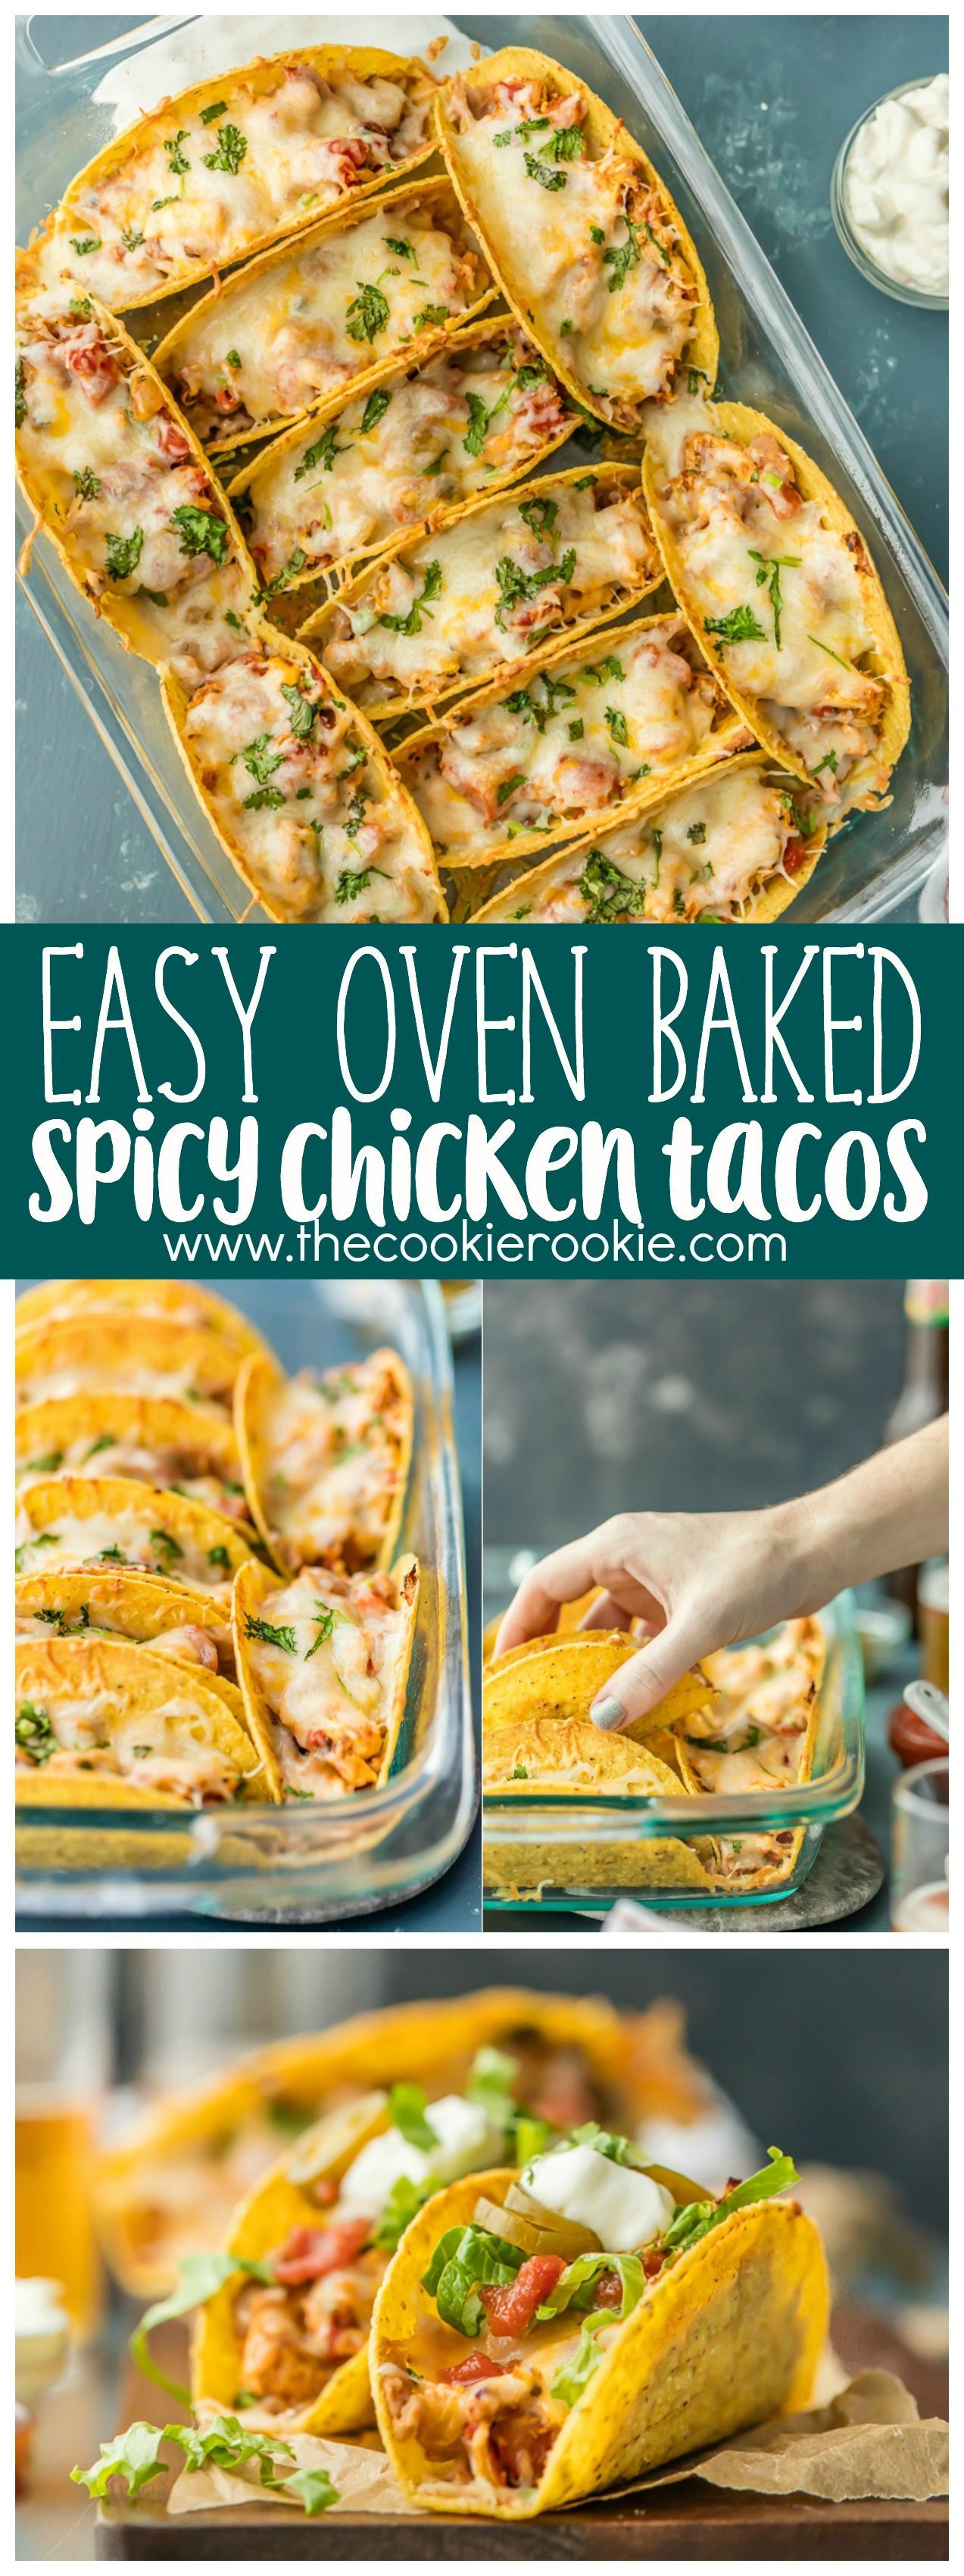 SUPER EASY Oven Baked Spicy Chicken Tacos make a weekly appearance on our table. All the flavor and no